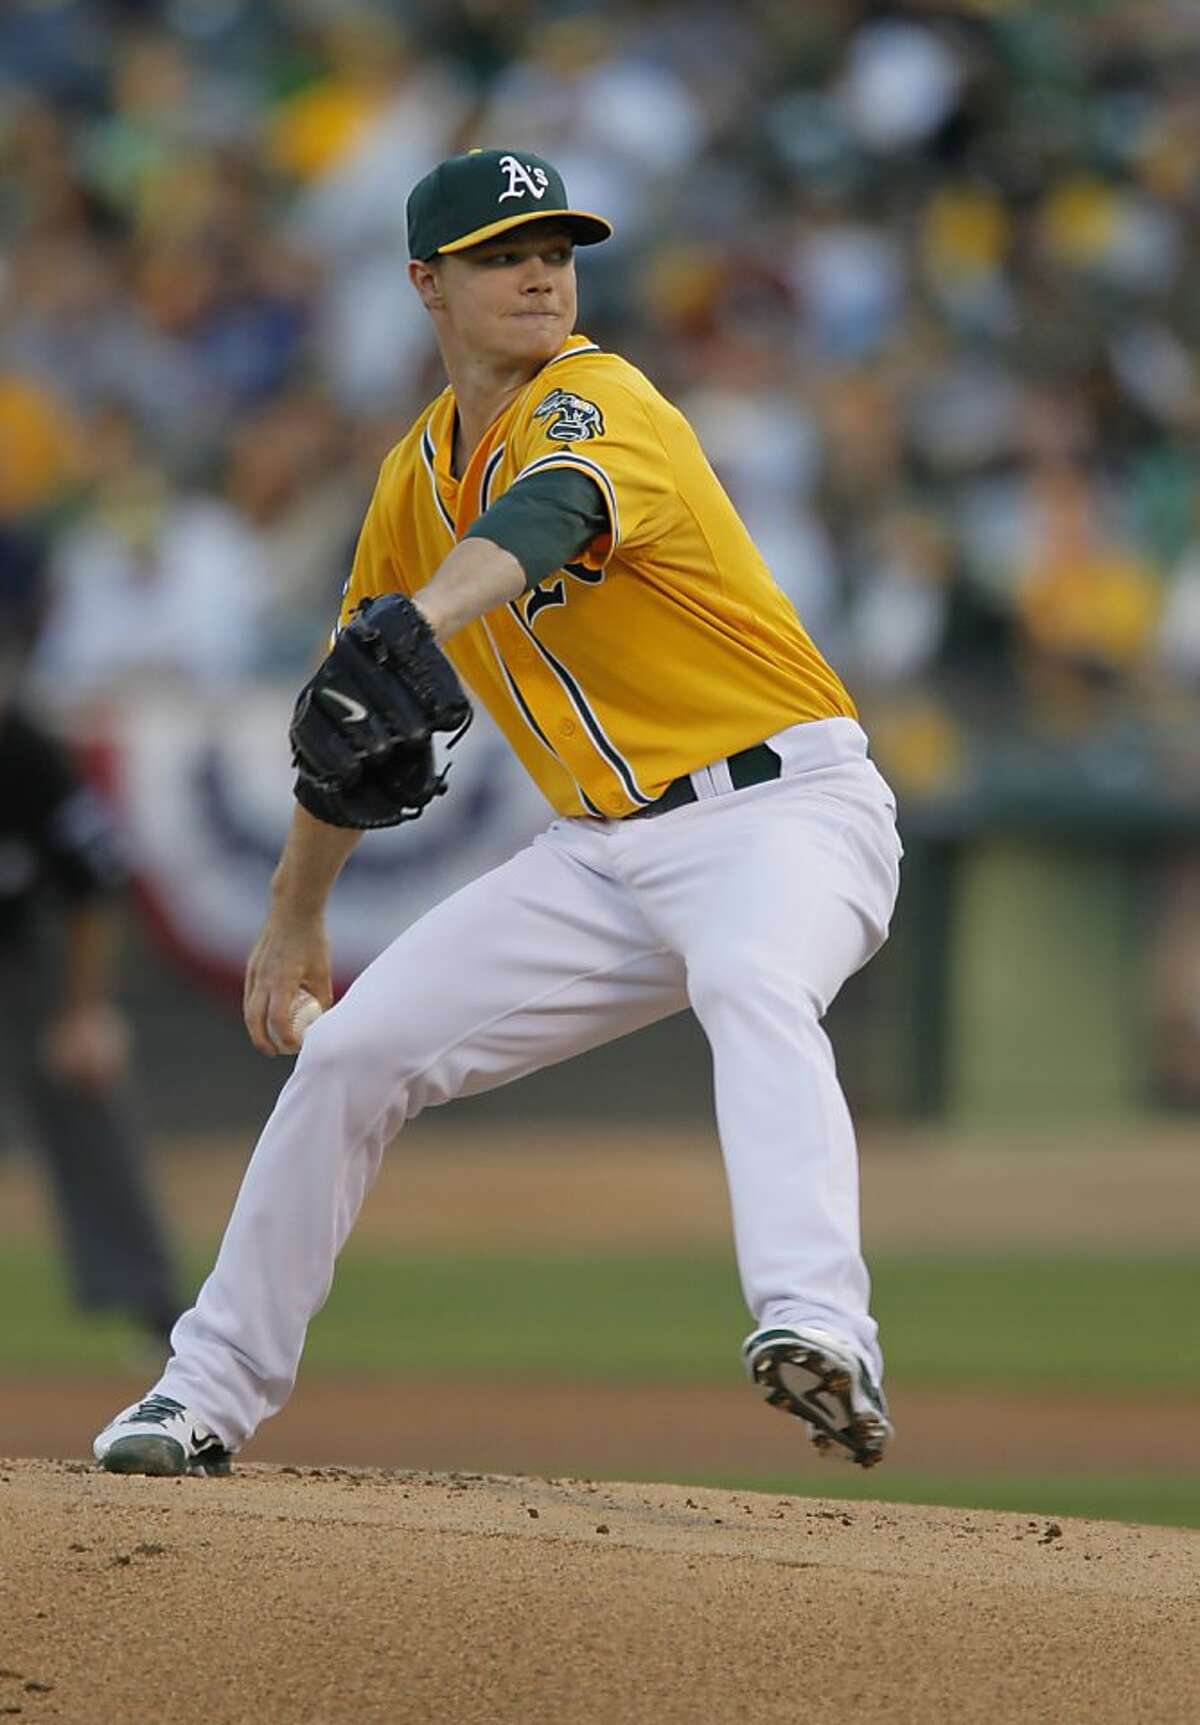 Sonny Gray started for the A's. The Oakland Athletics played the Detroit Tigers in Game 2 of the American League Division Series at O.co Coliseum in Oakland, Calif., on Saturday, October 5, 2013.